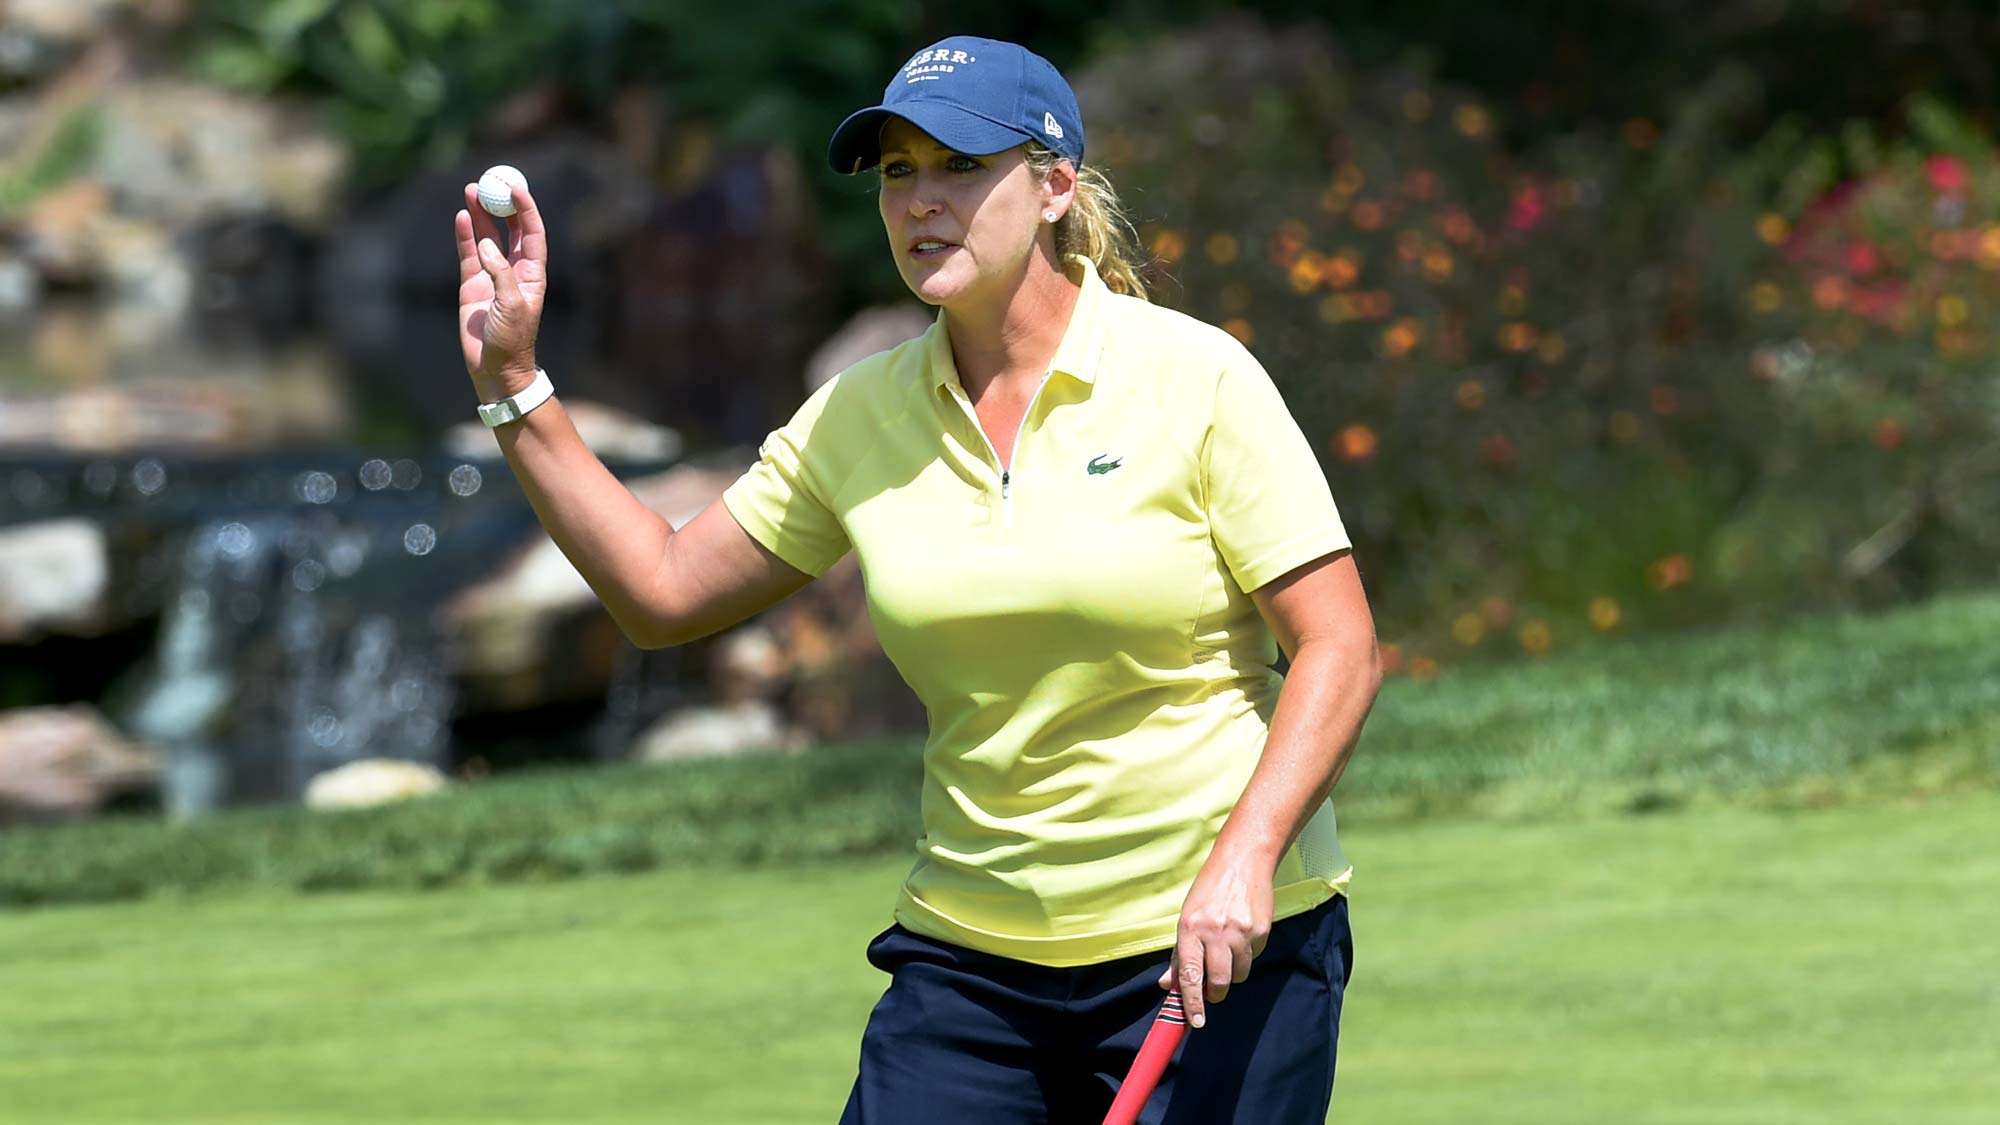 Cristie Kerr acknowledges the gallery after sinking a putt on the eighth hole during the second round of the Kia Classic